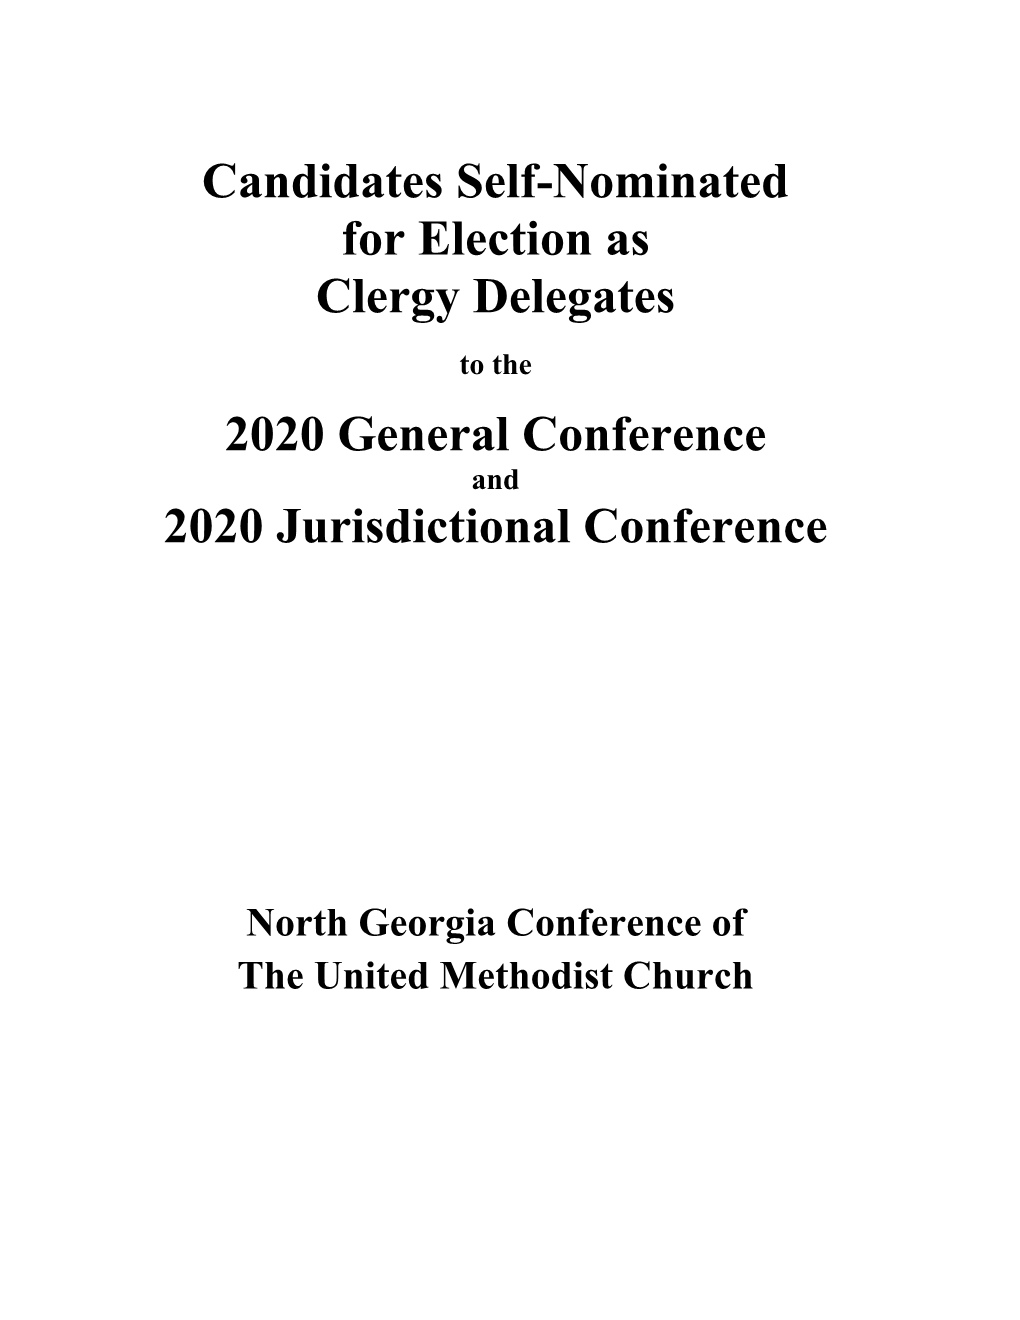 Candidates Self-Nominated for Election As Clergy Delegates 2020